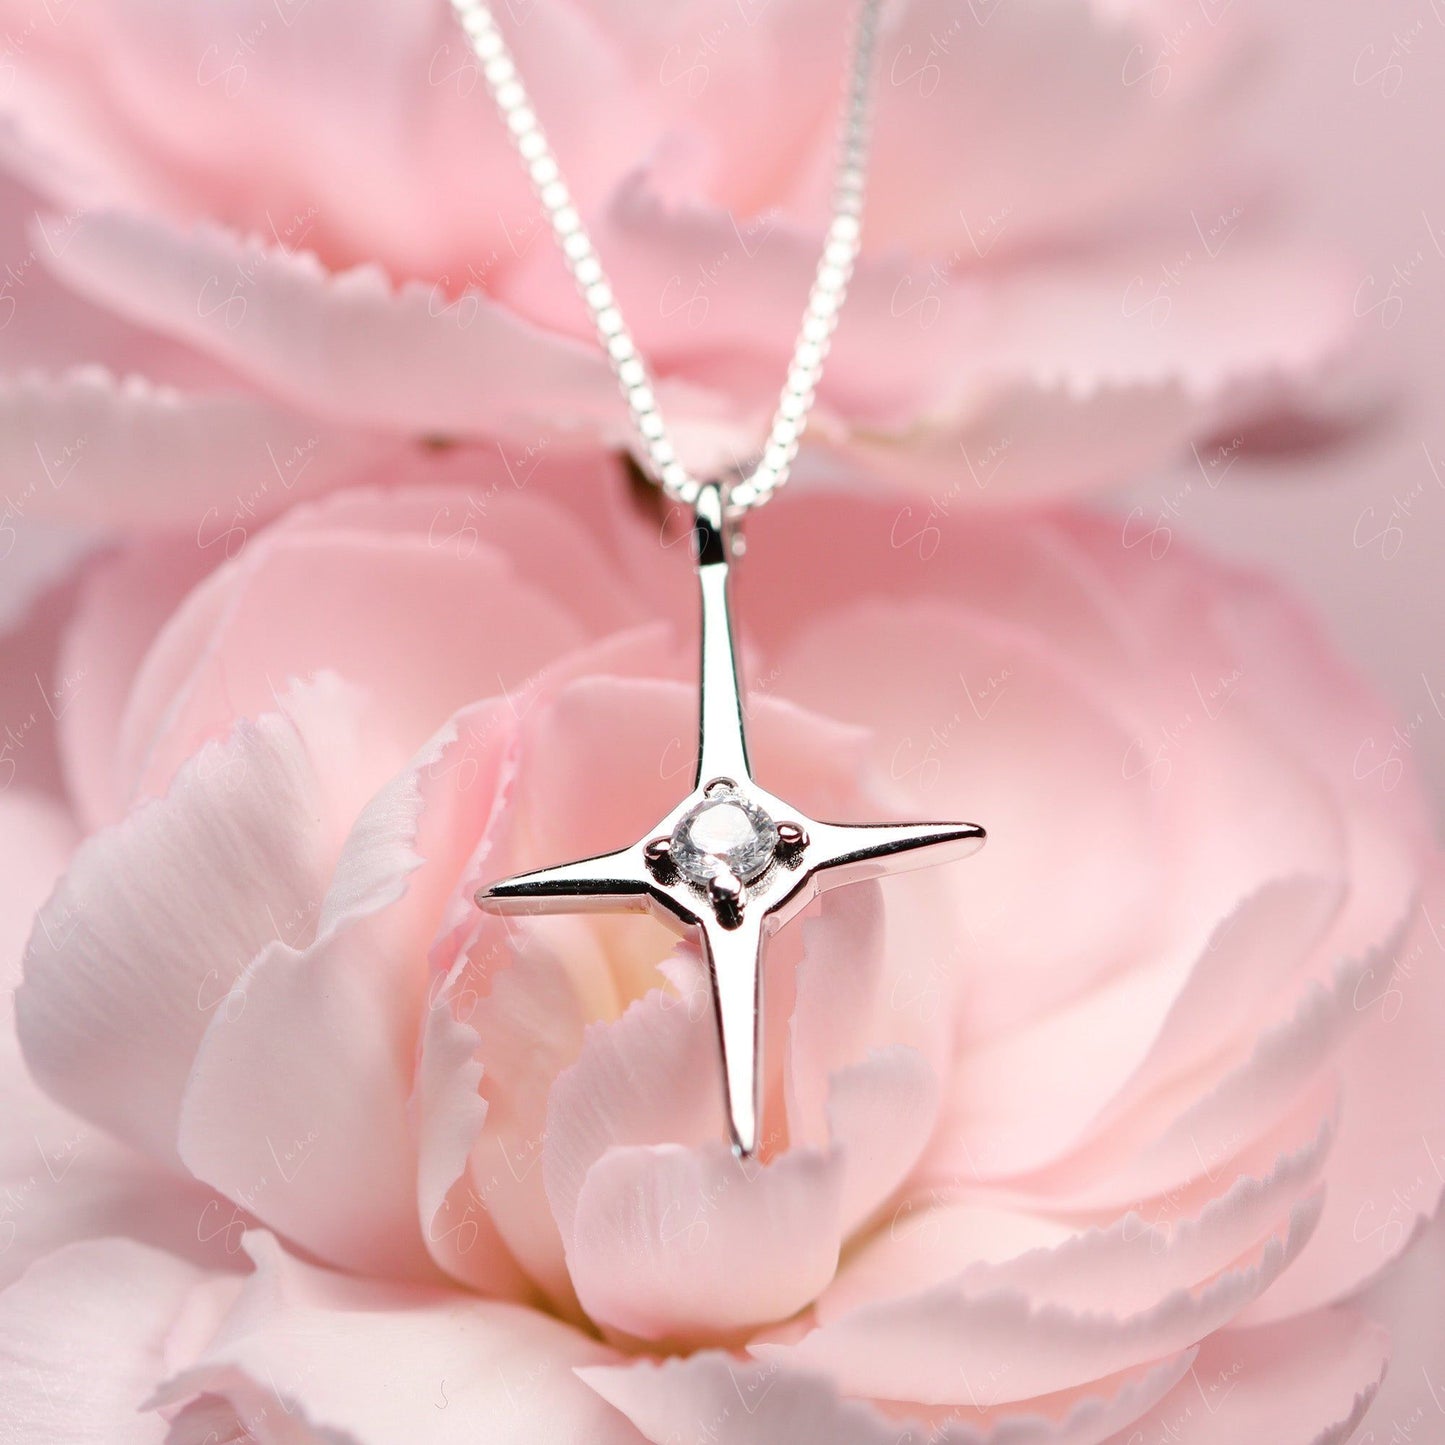 Simple star pendant silver necklace